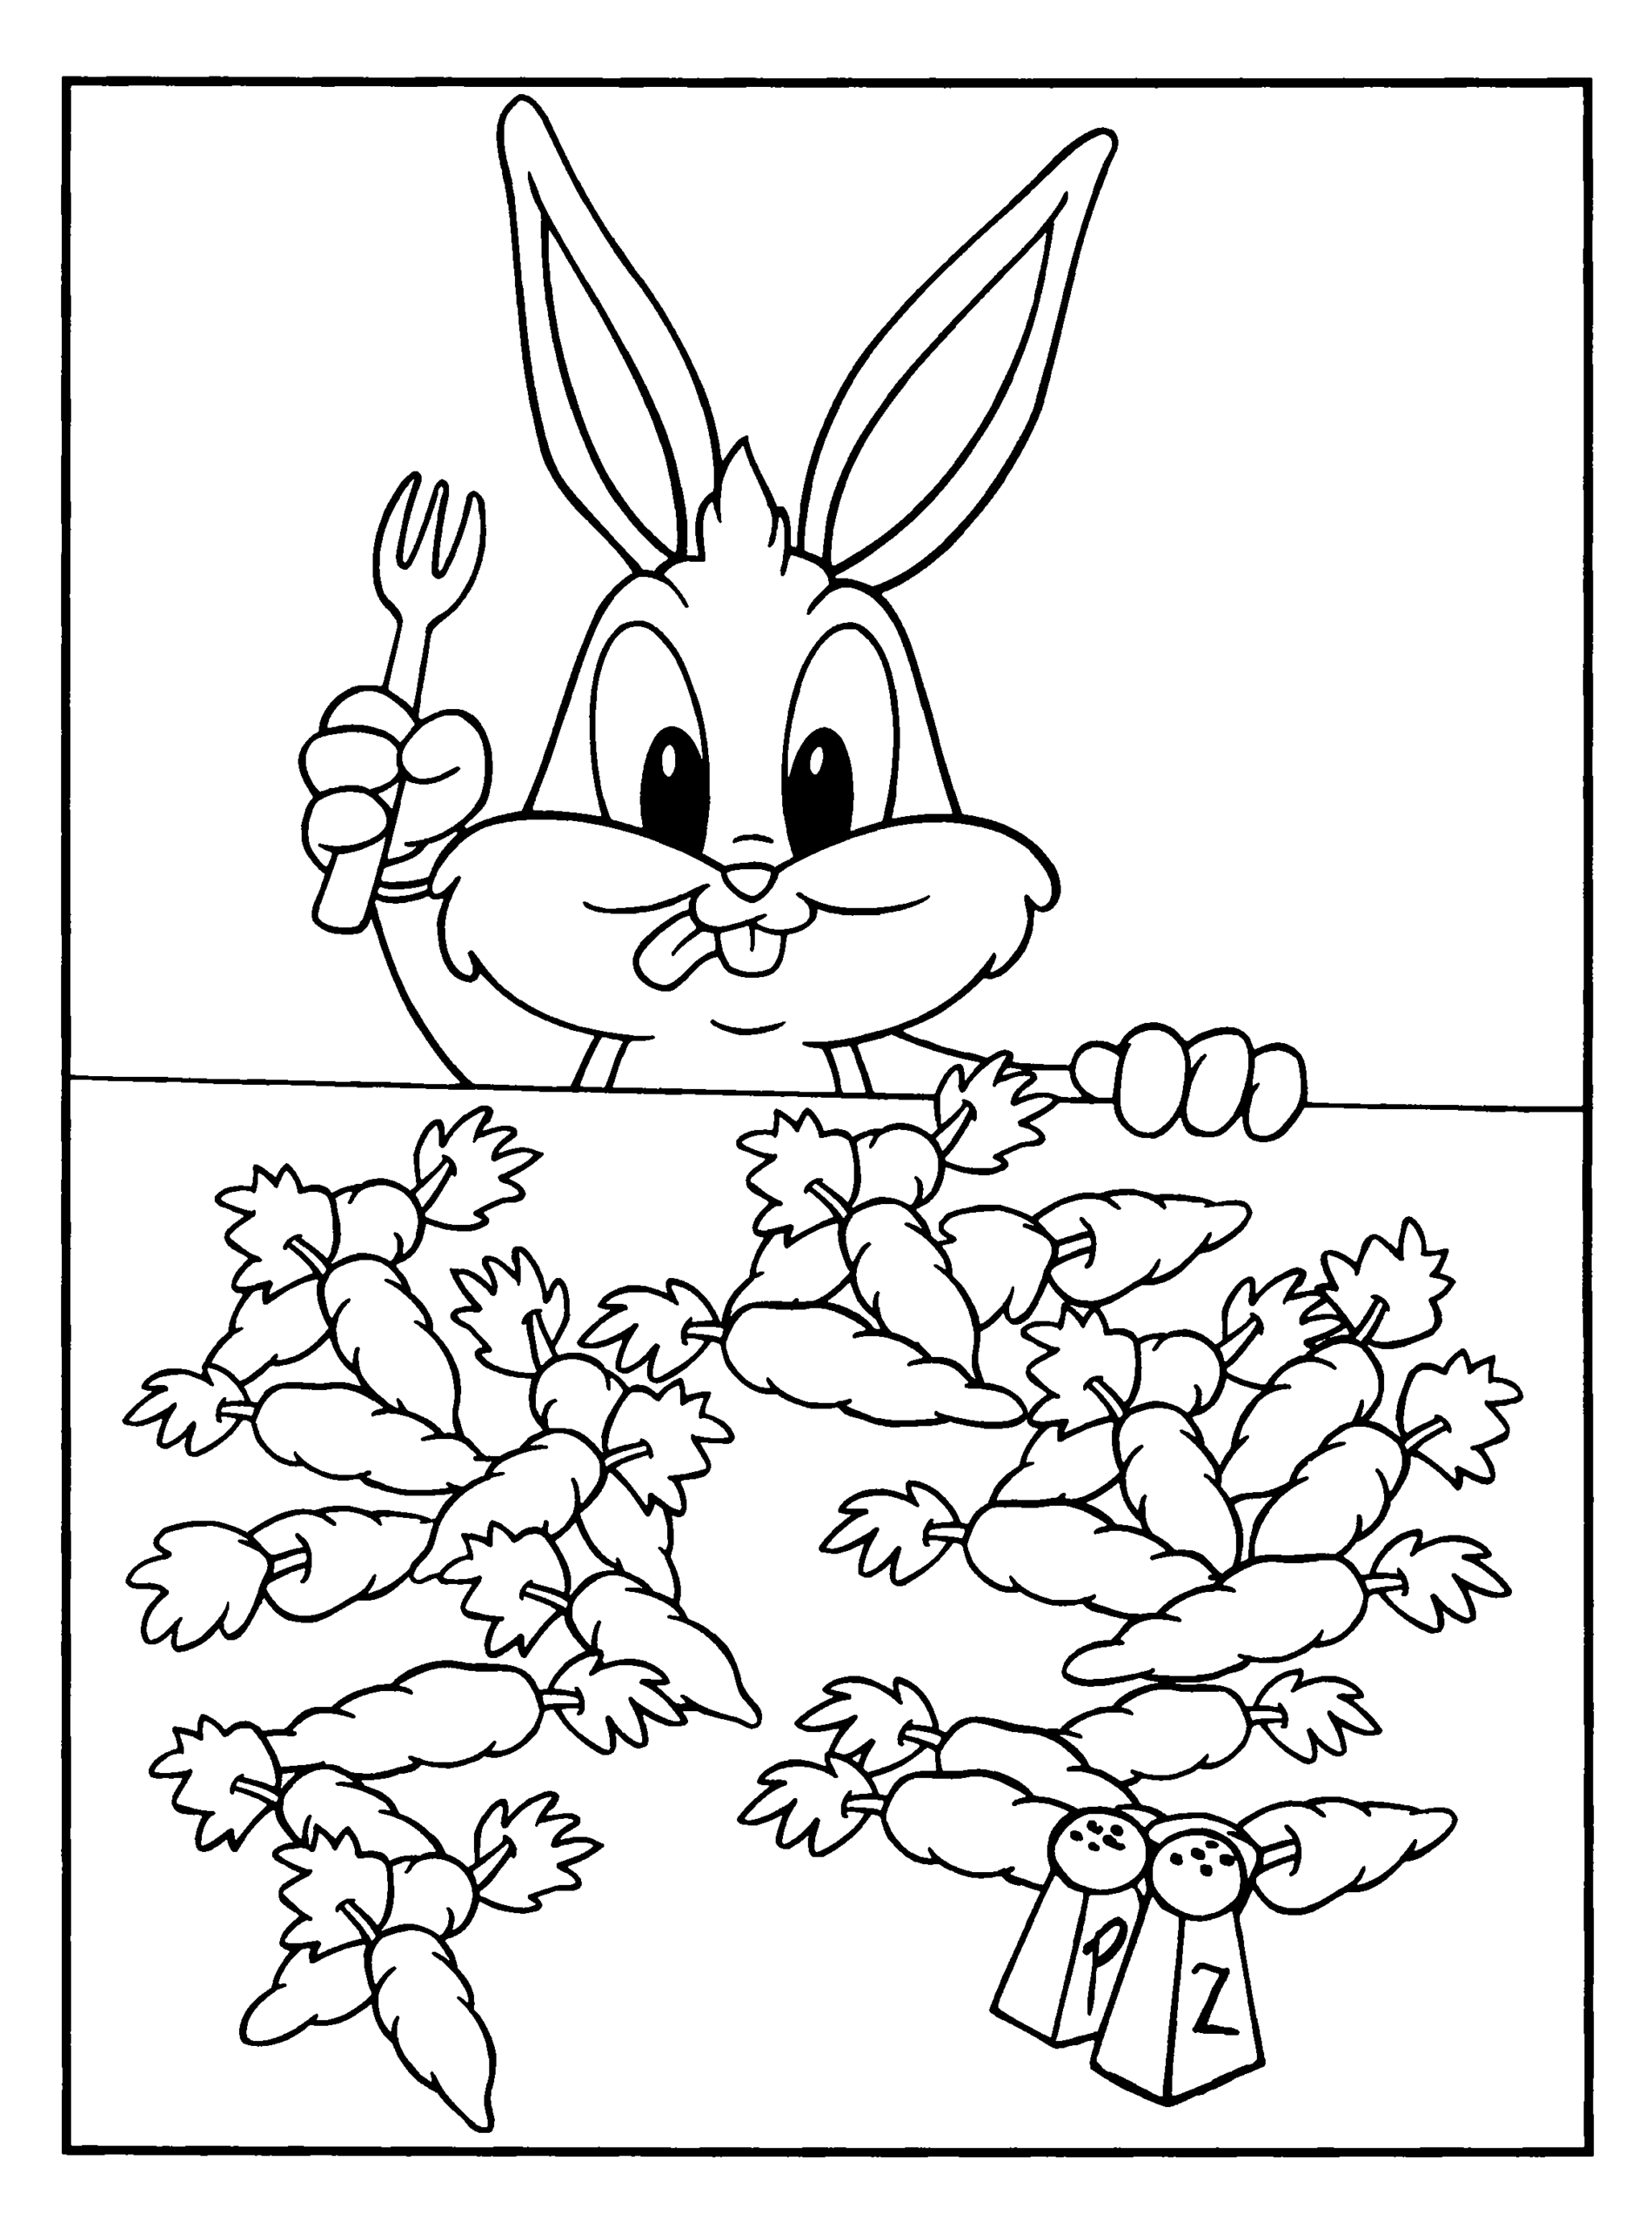 Baby Looney Tunes Coloring Pages TV Film baby looney tunes n10b1 Printable 2020 00396 Coloring4free